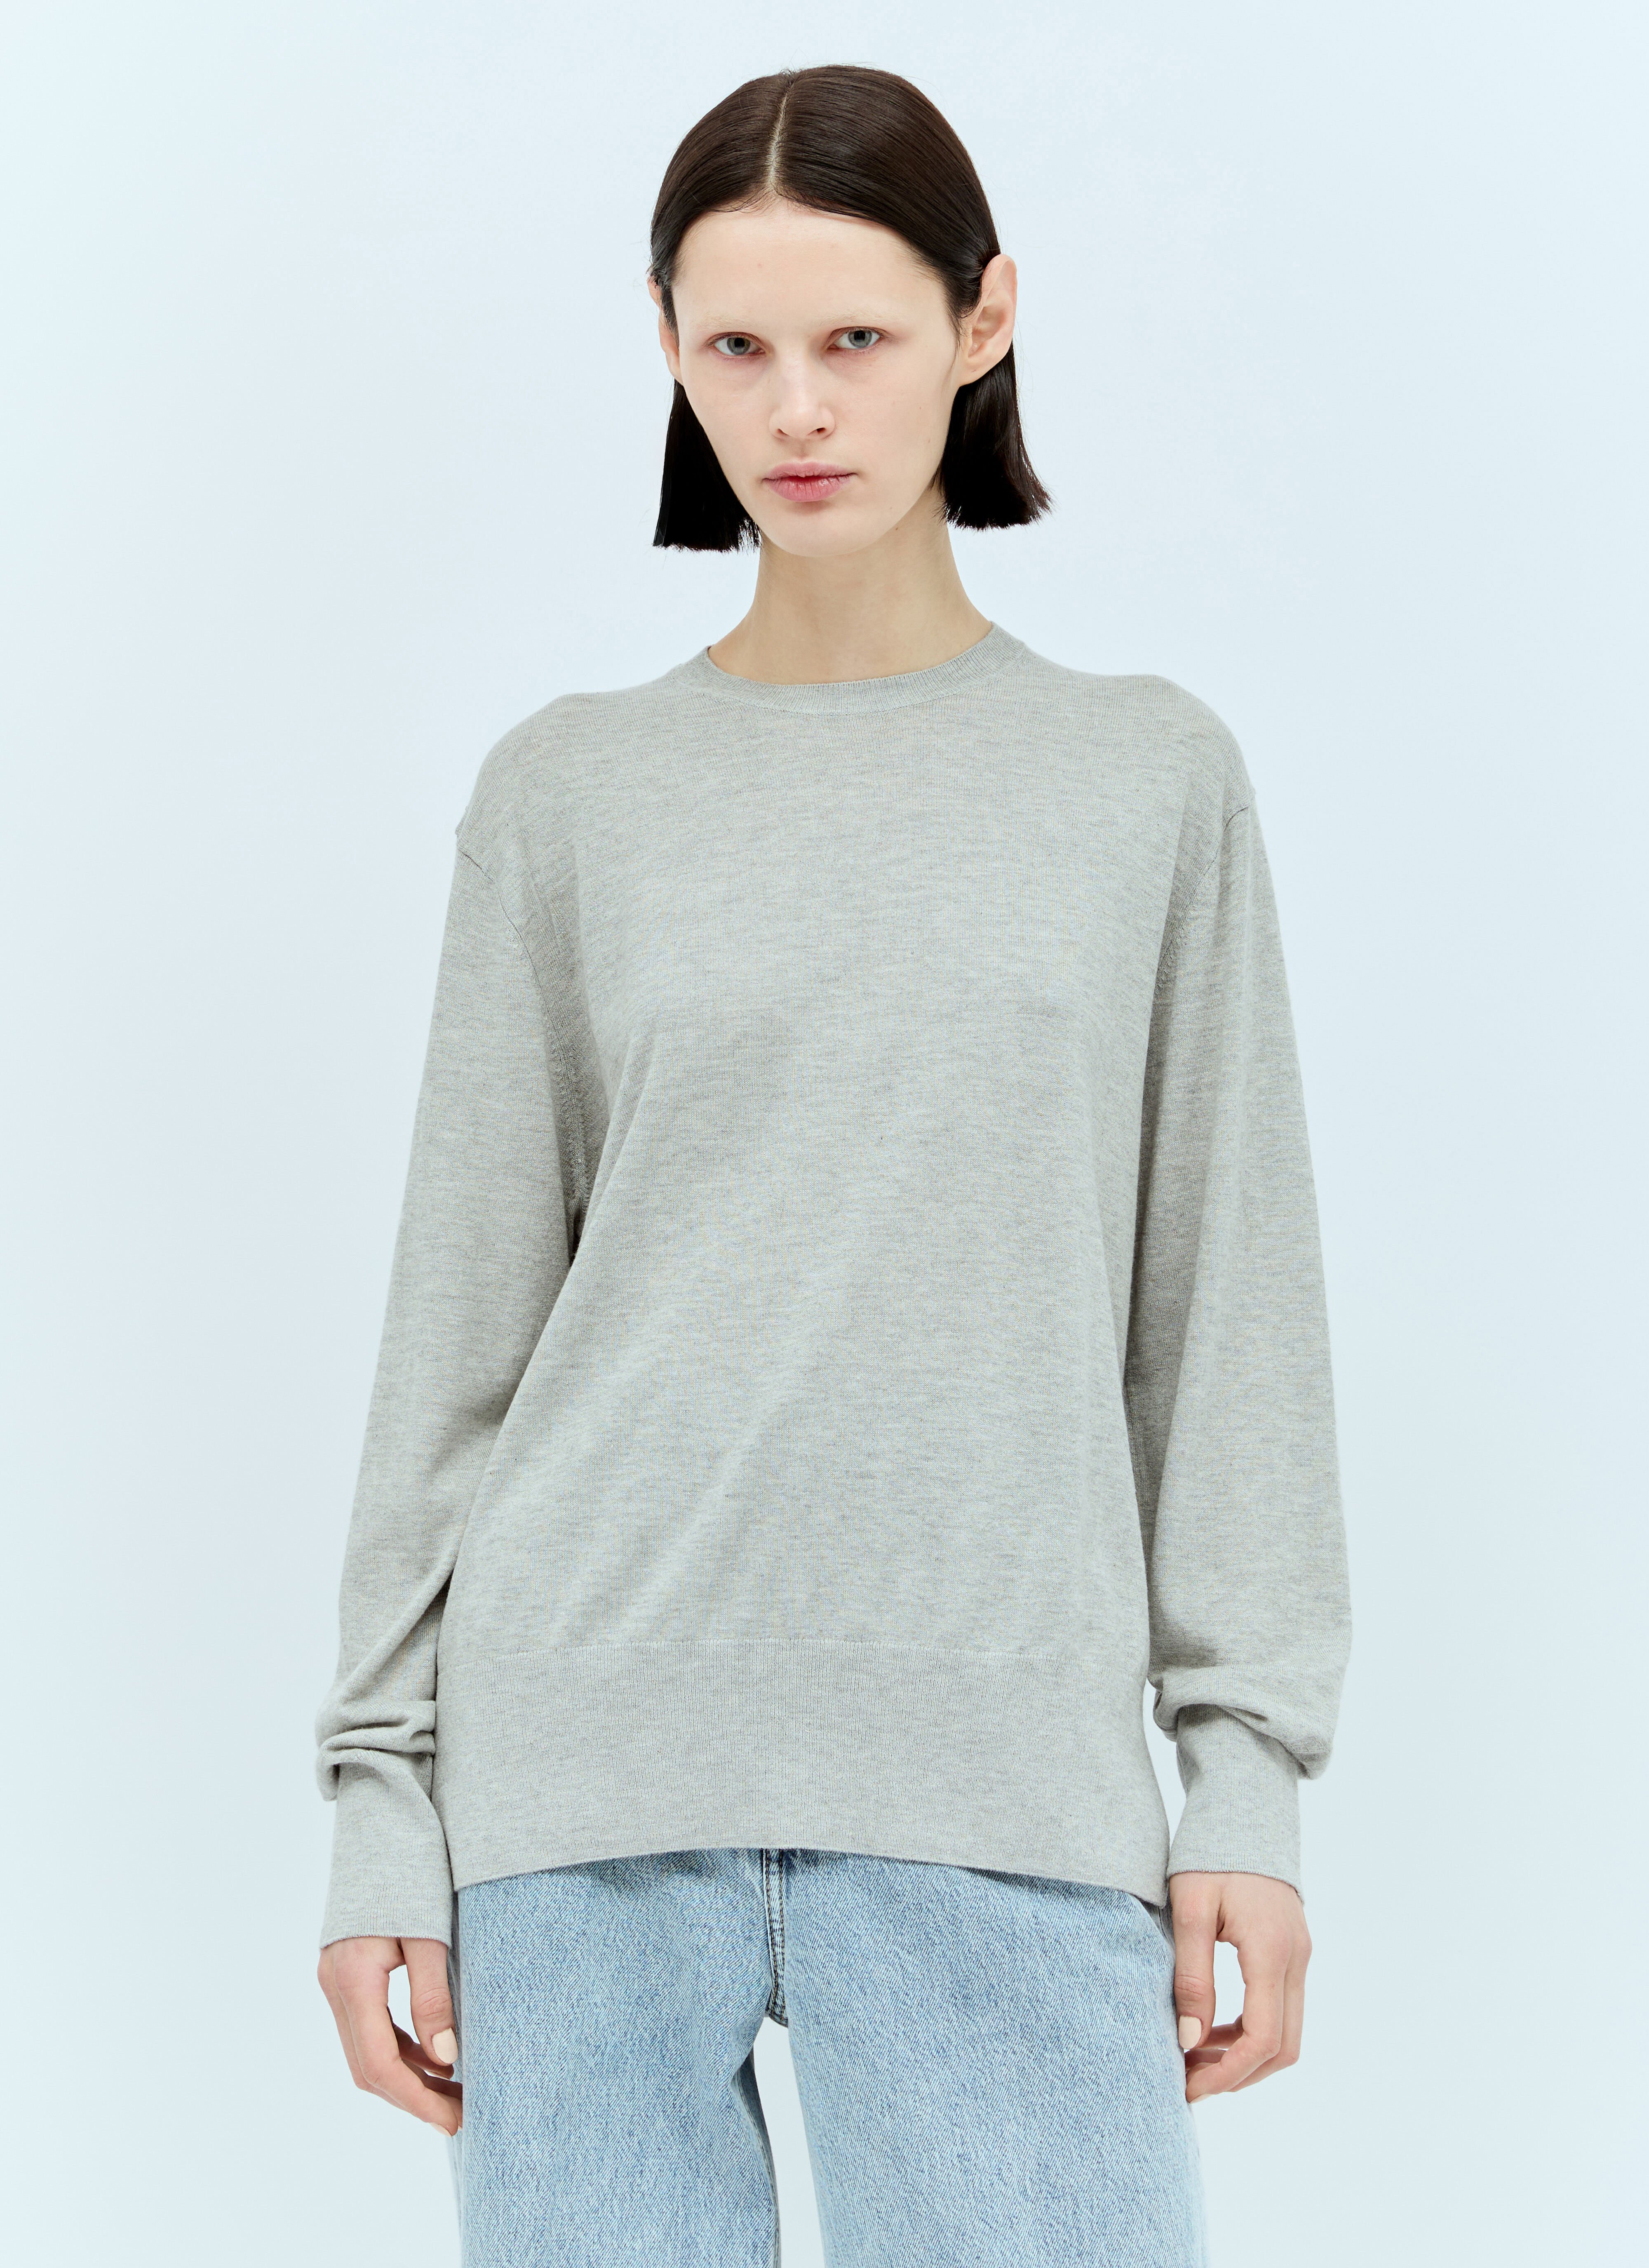 TOTEME Sik Cashmere Knit Sweater Cream tot0257014